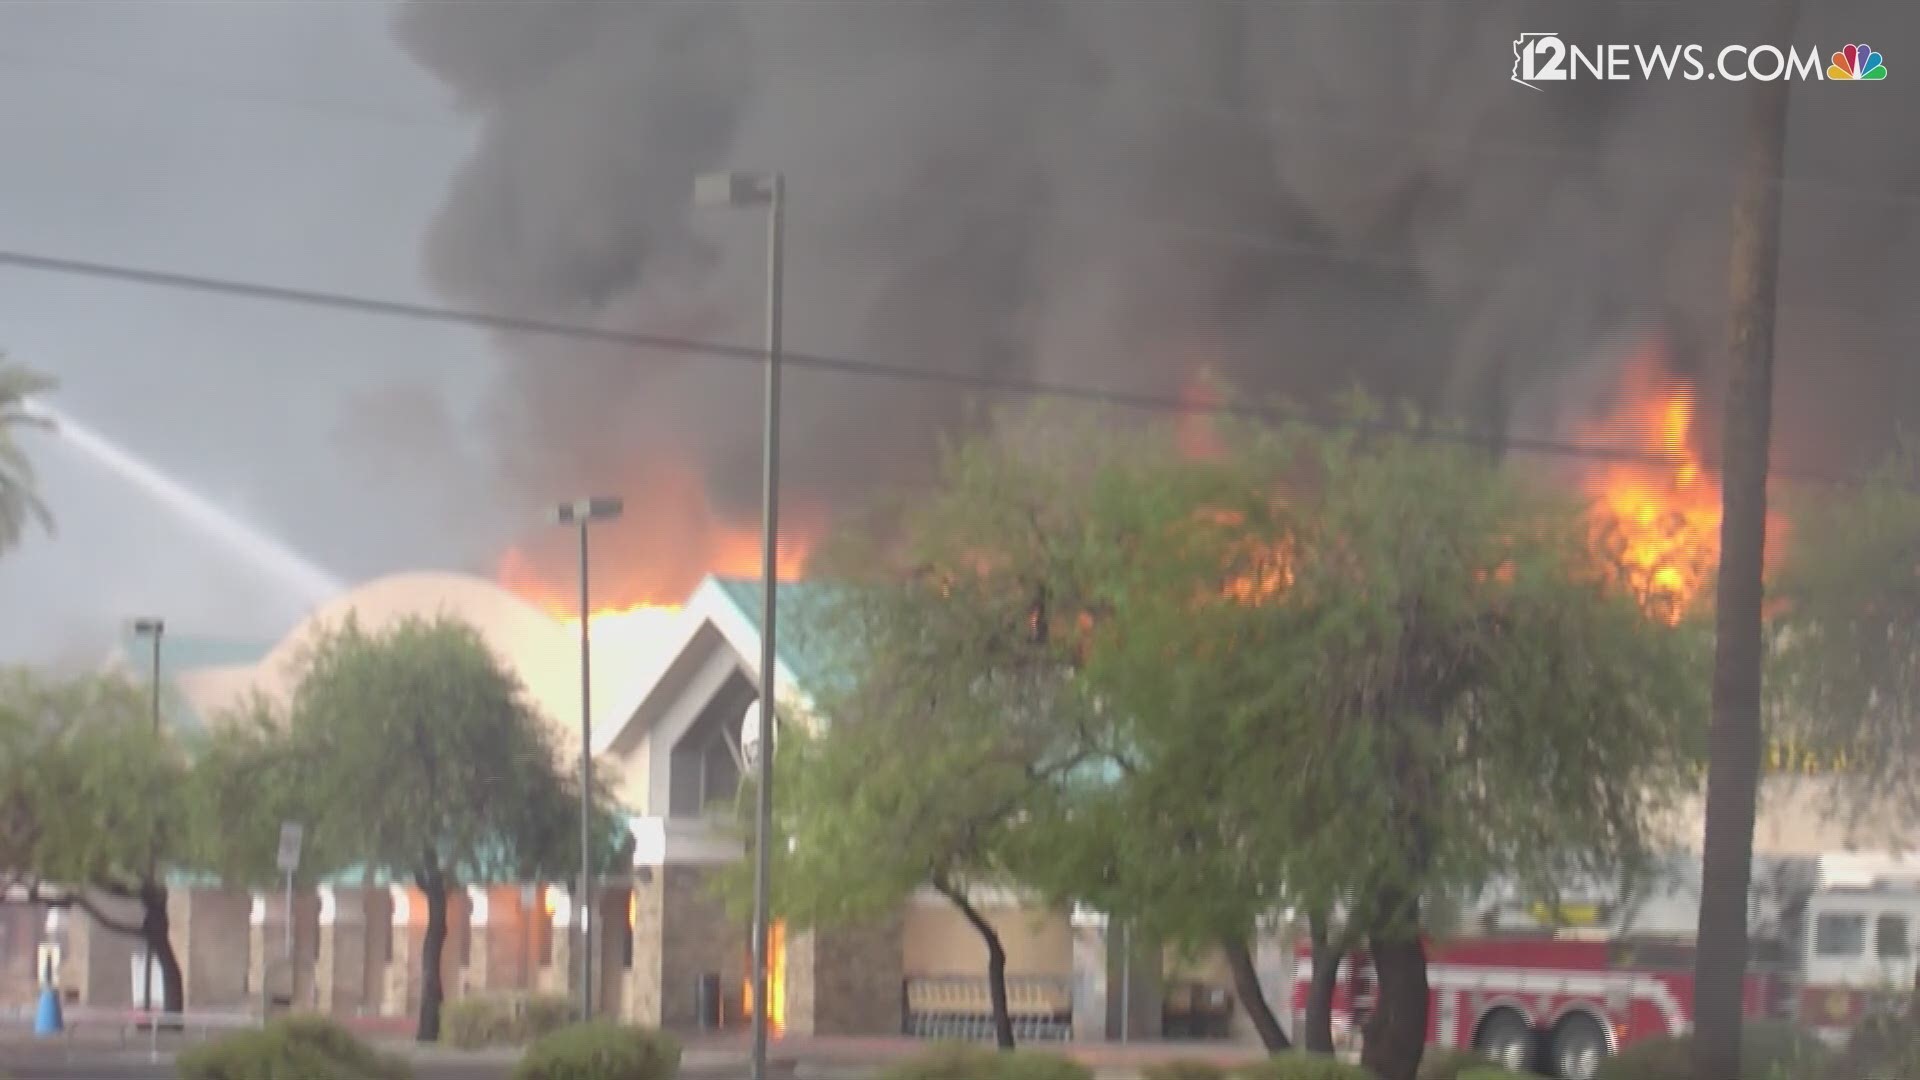 News 12 is on the scene of a fire at a north Phoenix Safeway where the roof has reportedly collapsed.